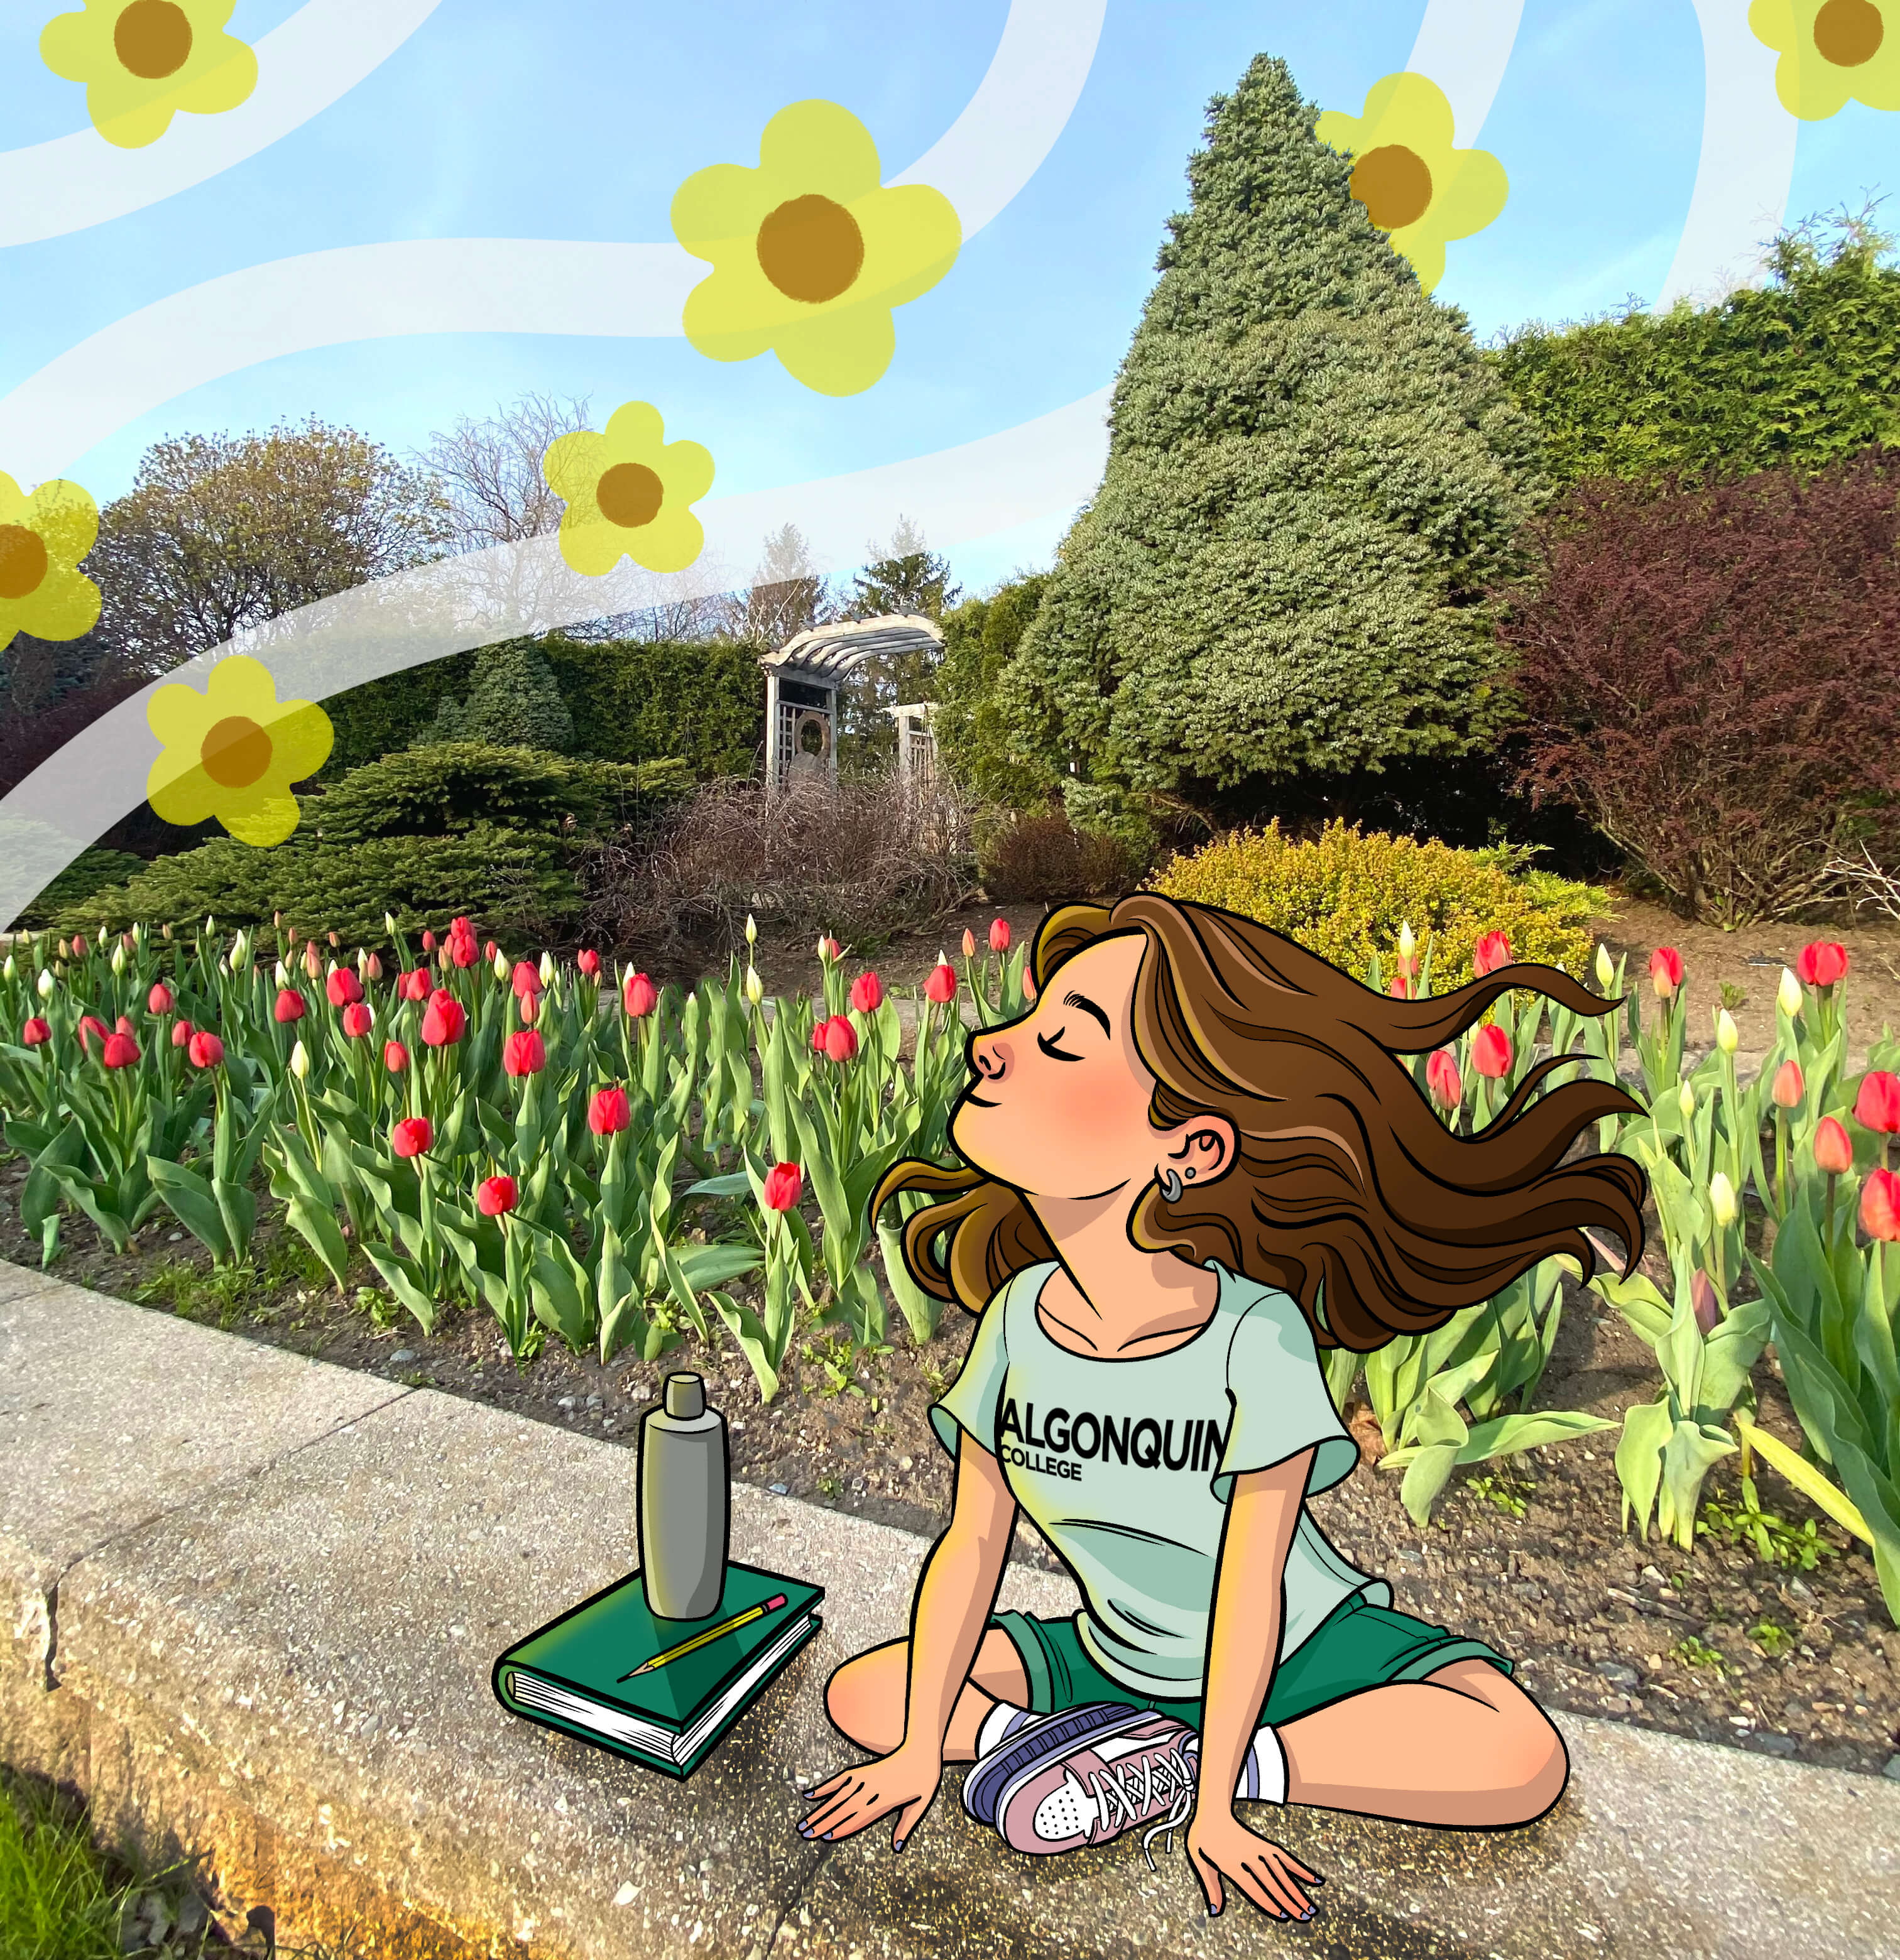 Student seated in the garden relaxing. Illustration by Julia Pinto